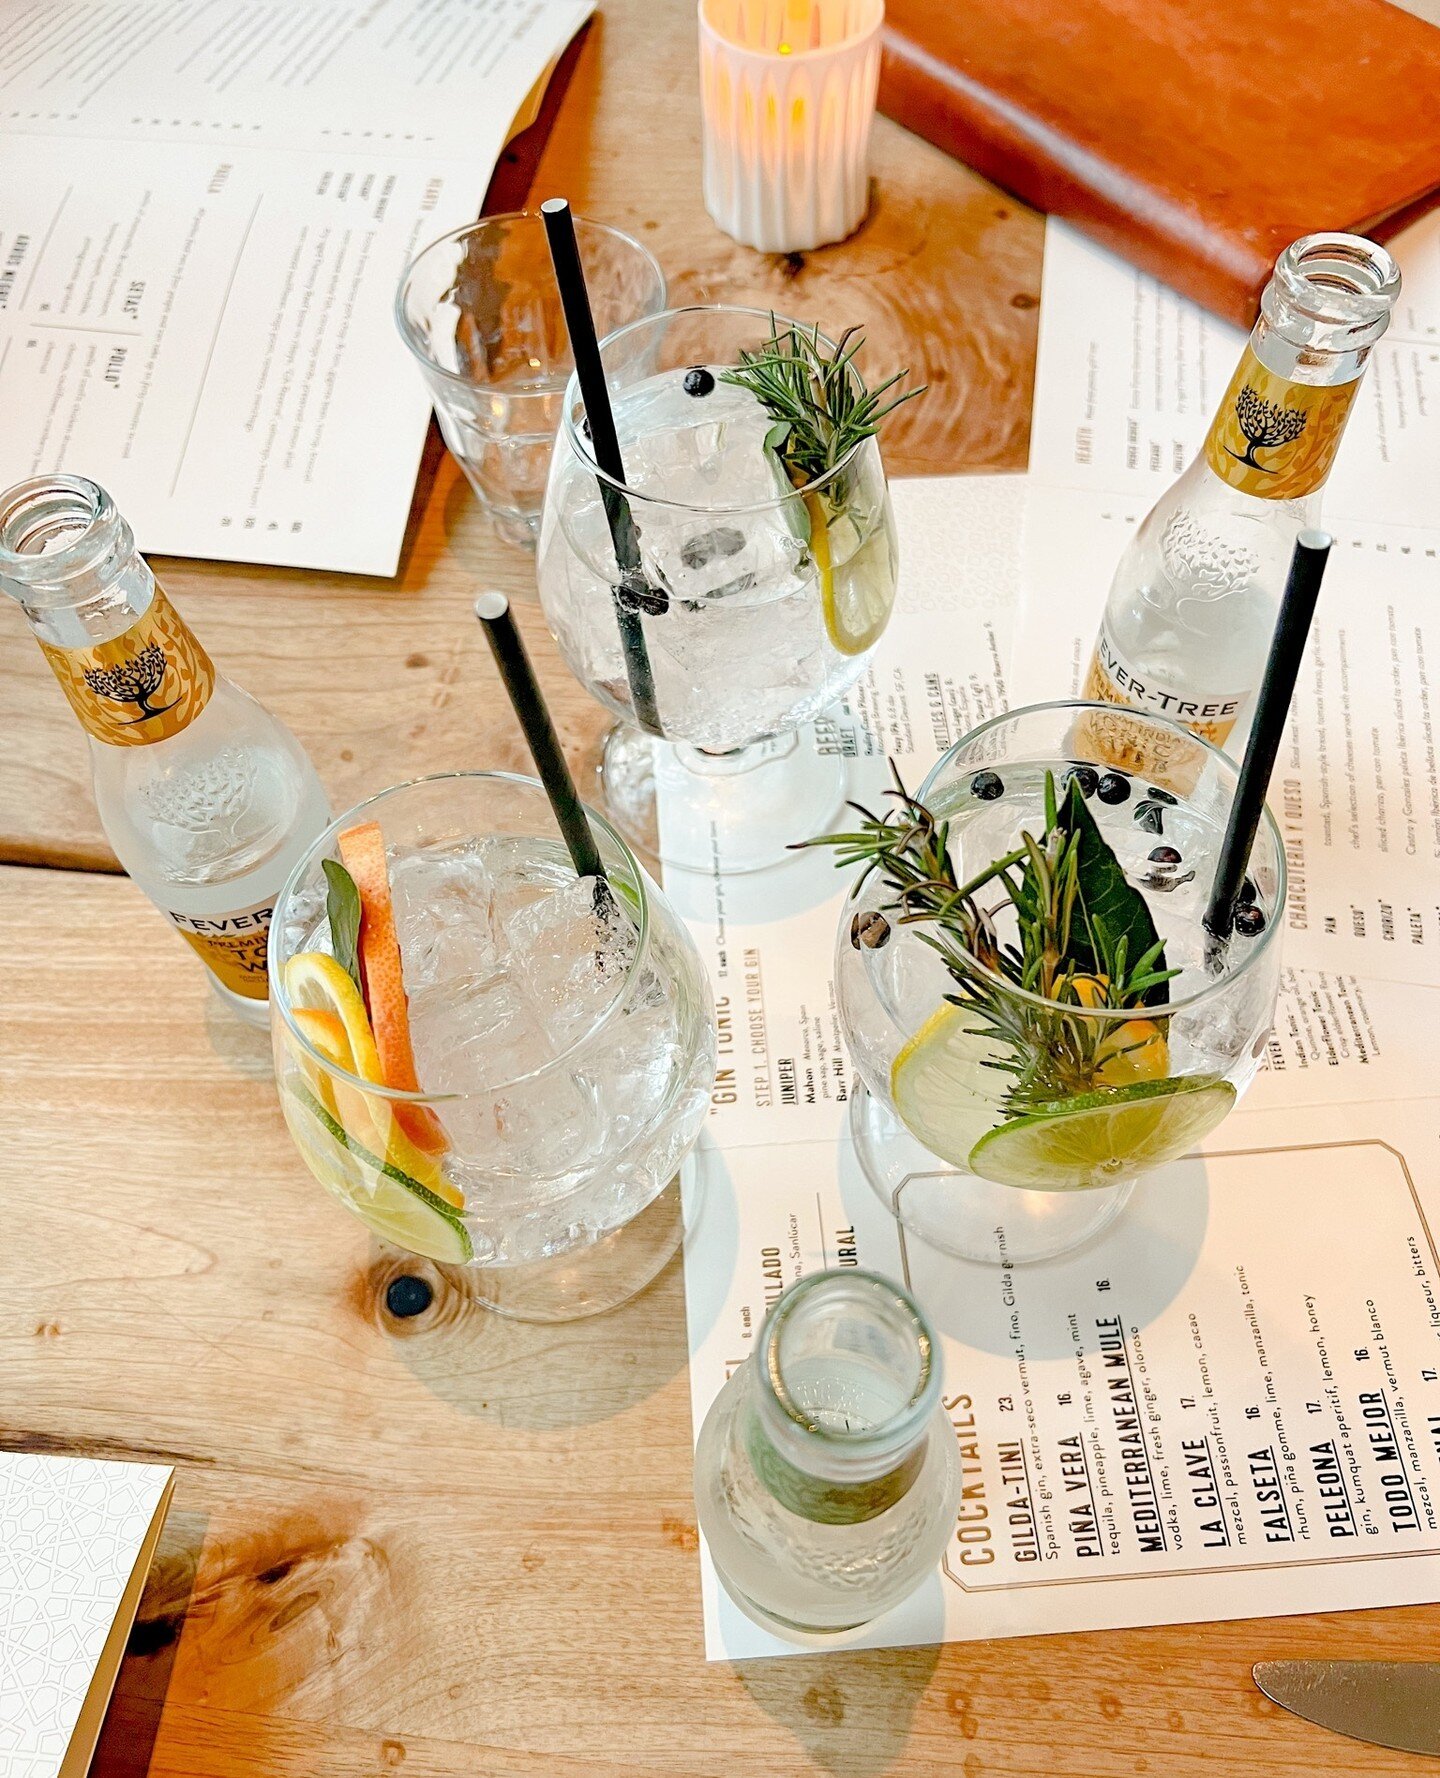 You, me, and G&amp;Ts?⁠
⁠
⁠
⁠
⁠
#bellotasf #bellota #porronatbellota #sanfrancisco #spanishcuisine #tapas #eater #eatersf #drinksf #ginandtonic #gandt #fevertree #gintonic #spanish #buildyourown #buildyourowncocktail #cocktaillovers #cocktailhour⁠ #c